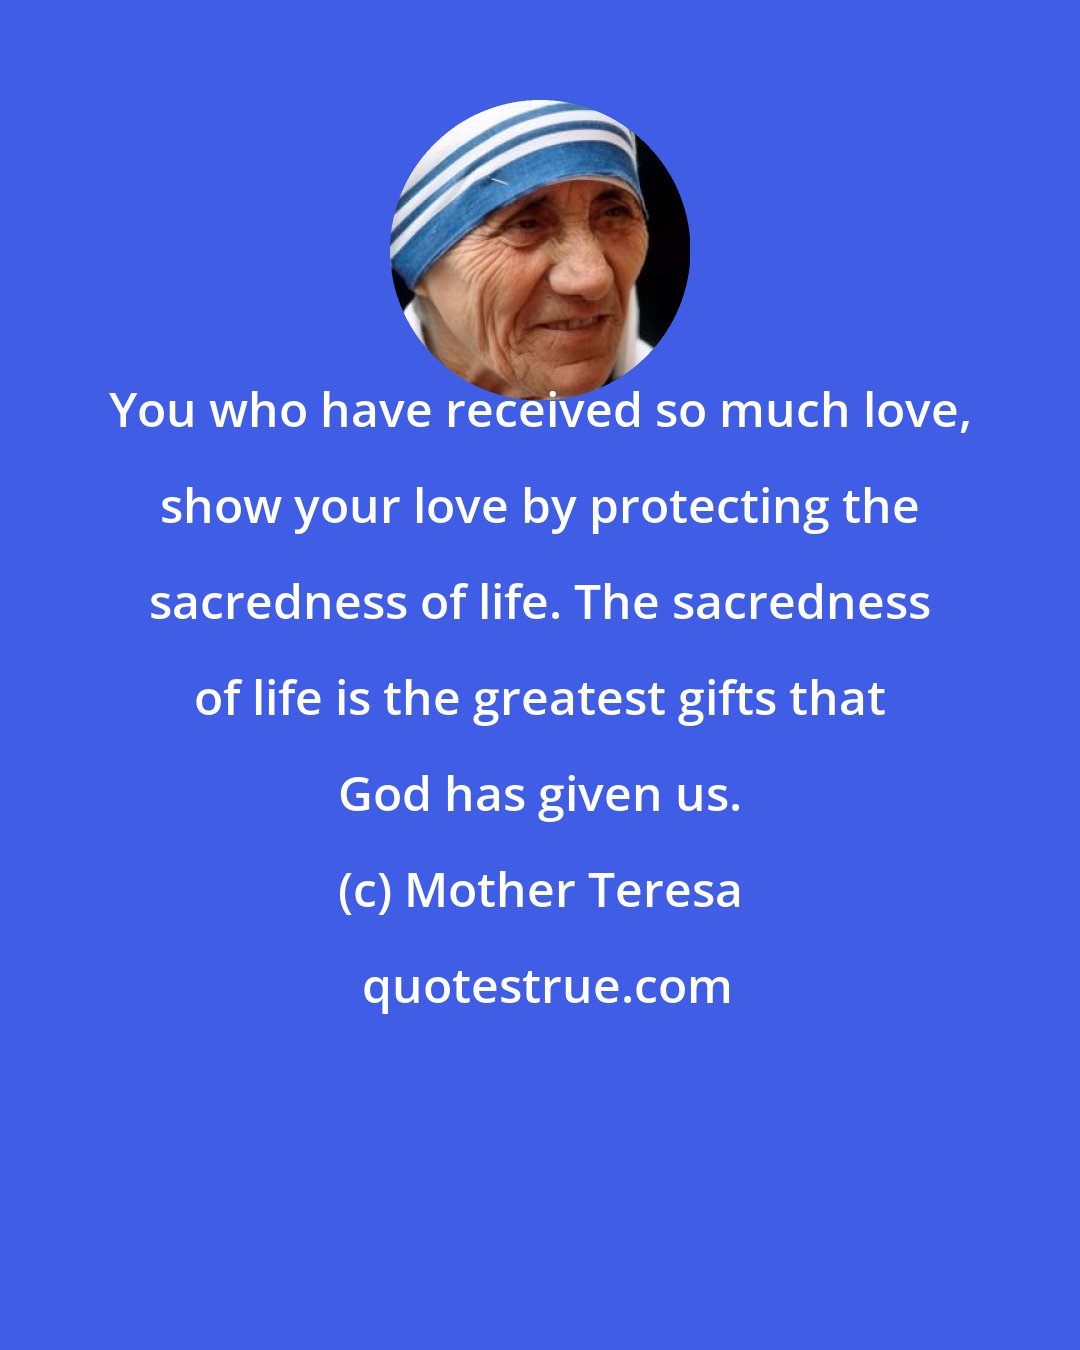 Mother Teresa: You who have received so much love, show your love by protecting the sacredness of life. The sacredness of life is the greatest gifts that God has given us.